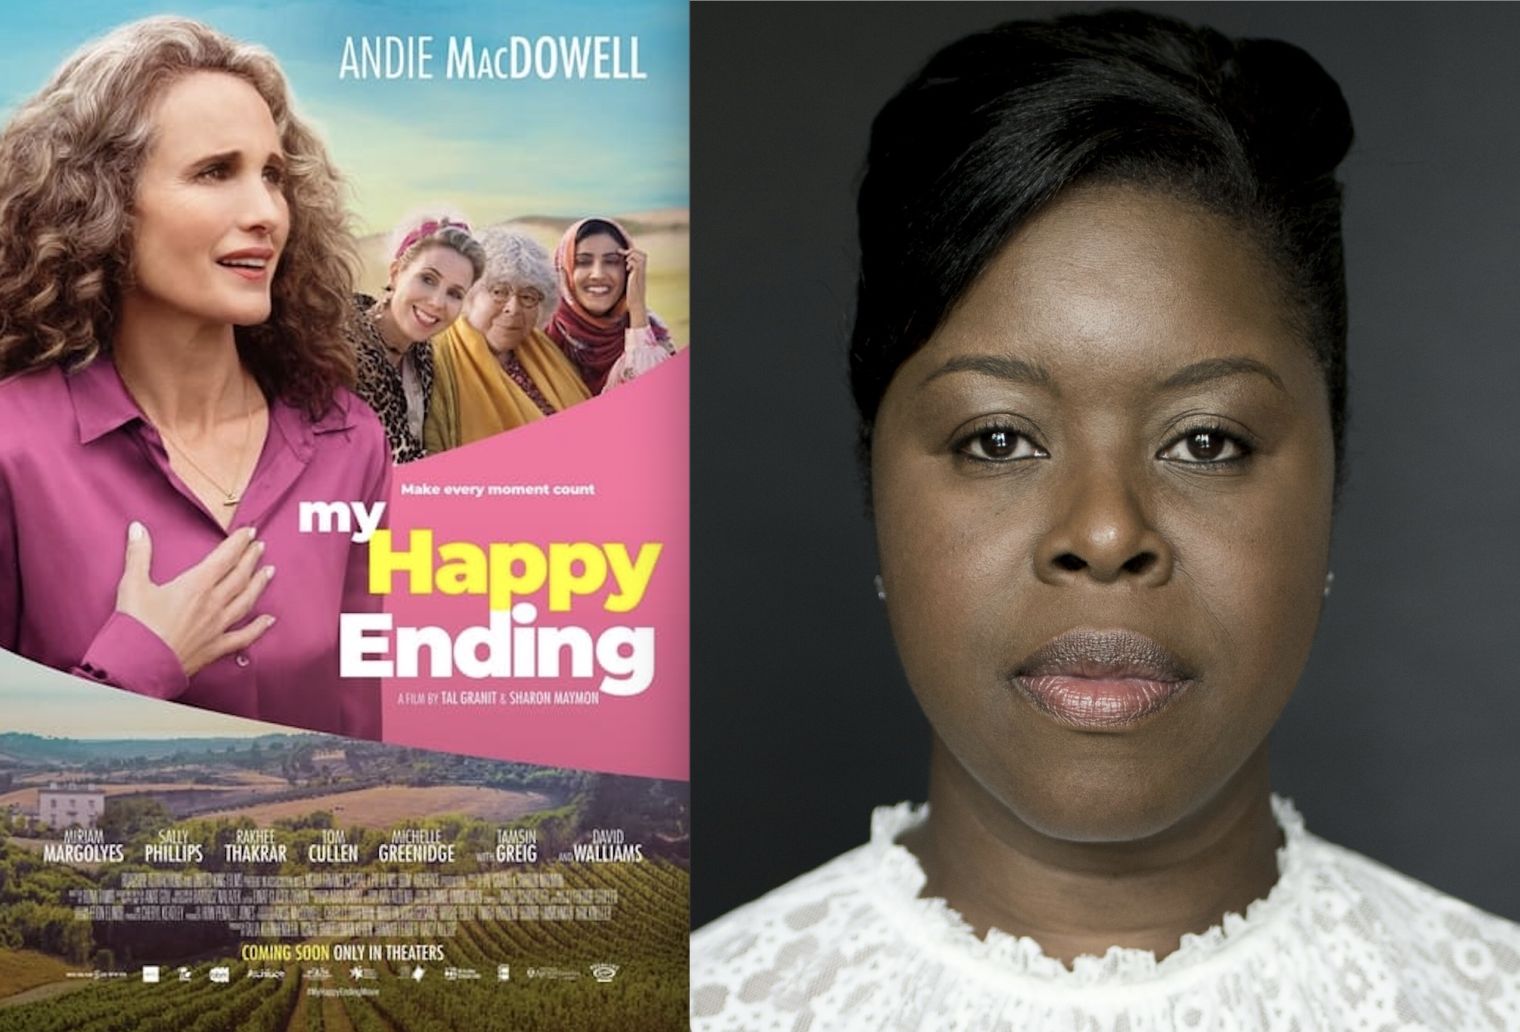 Michelle Greenidge stars as Nurse Emilia in My Happy Ending which is out in US cinemas now